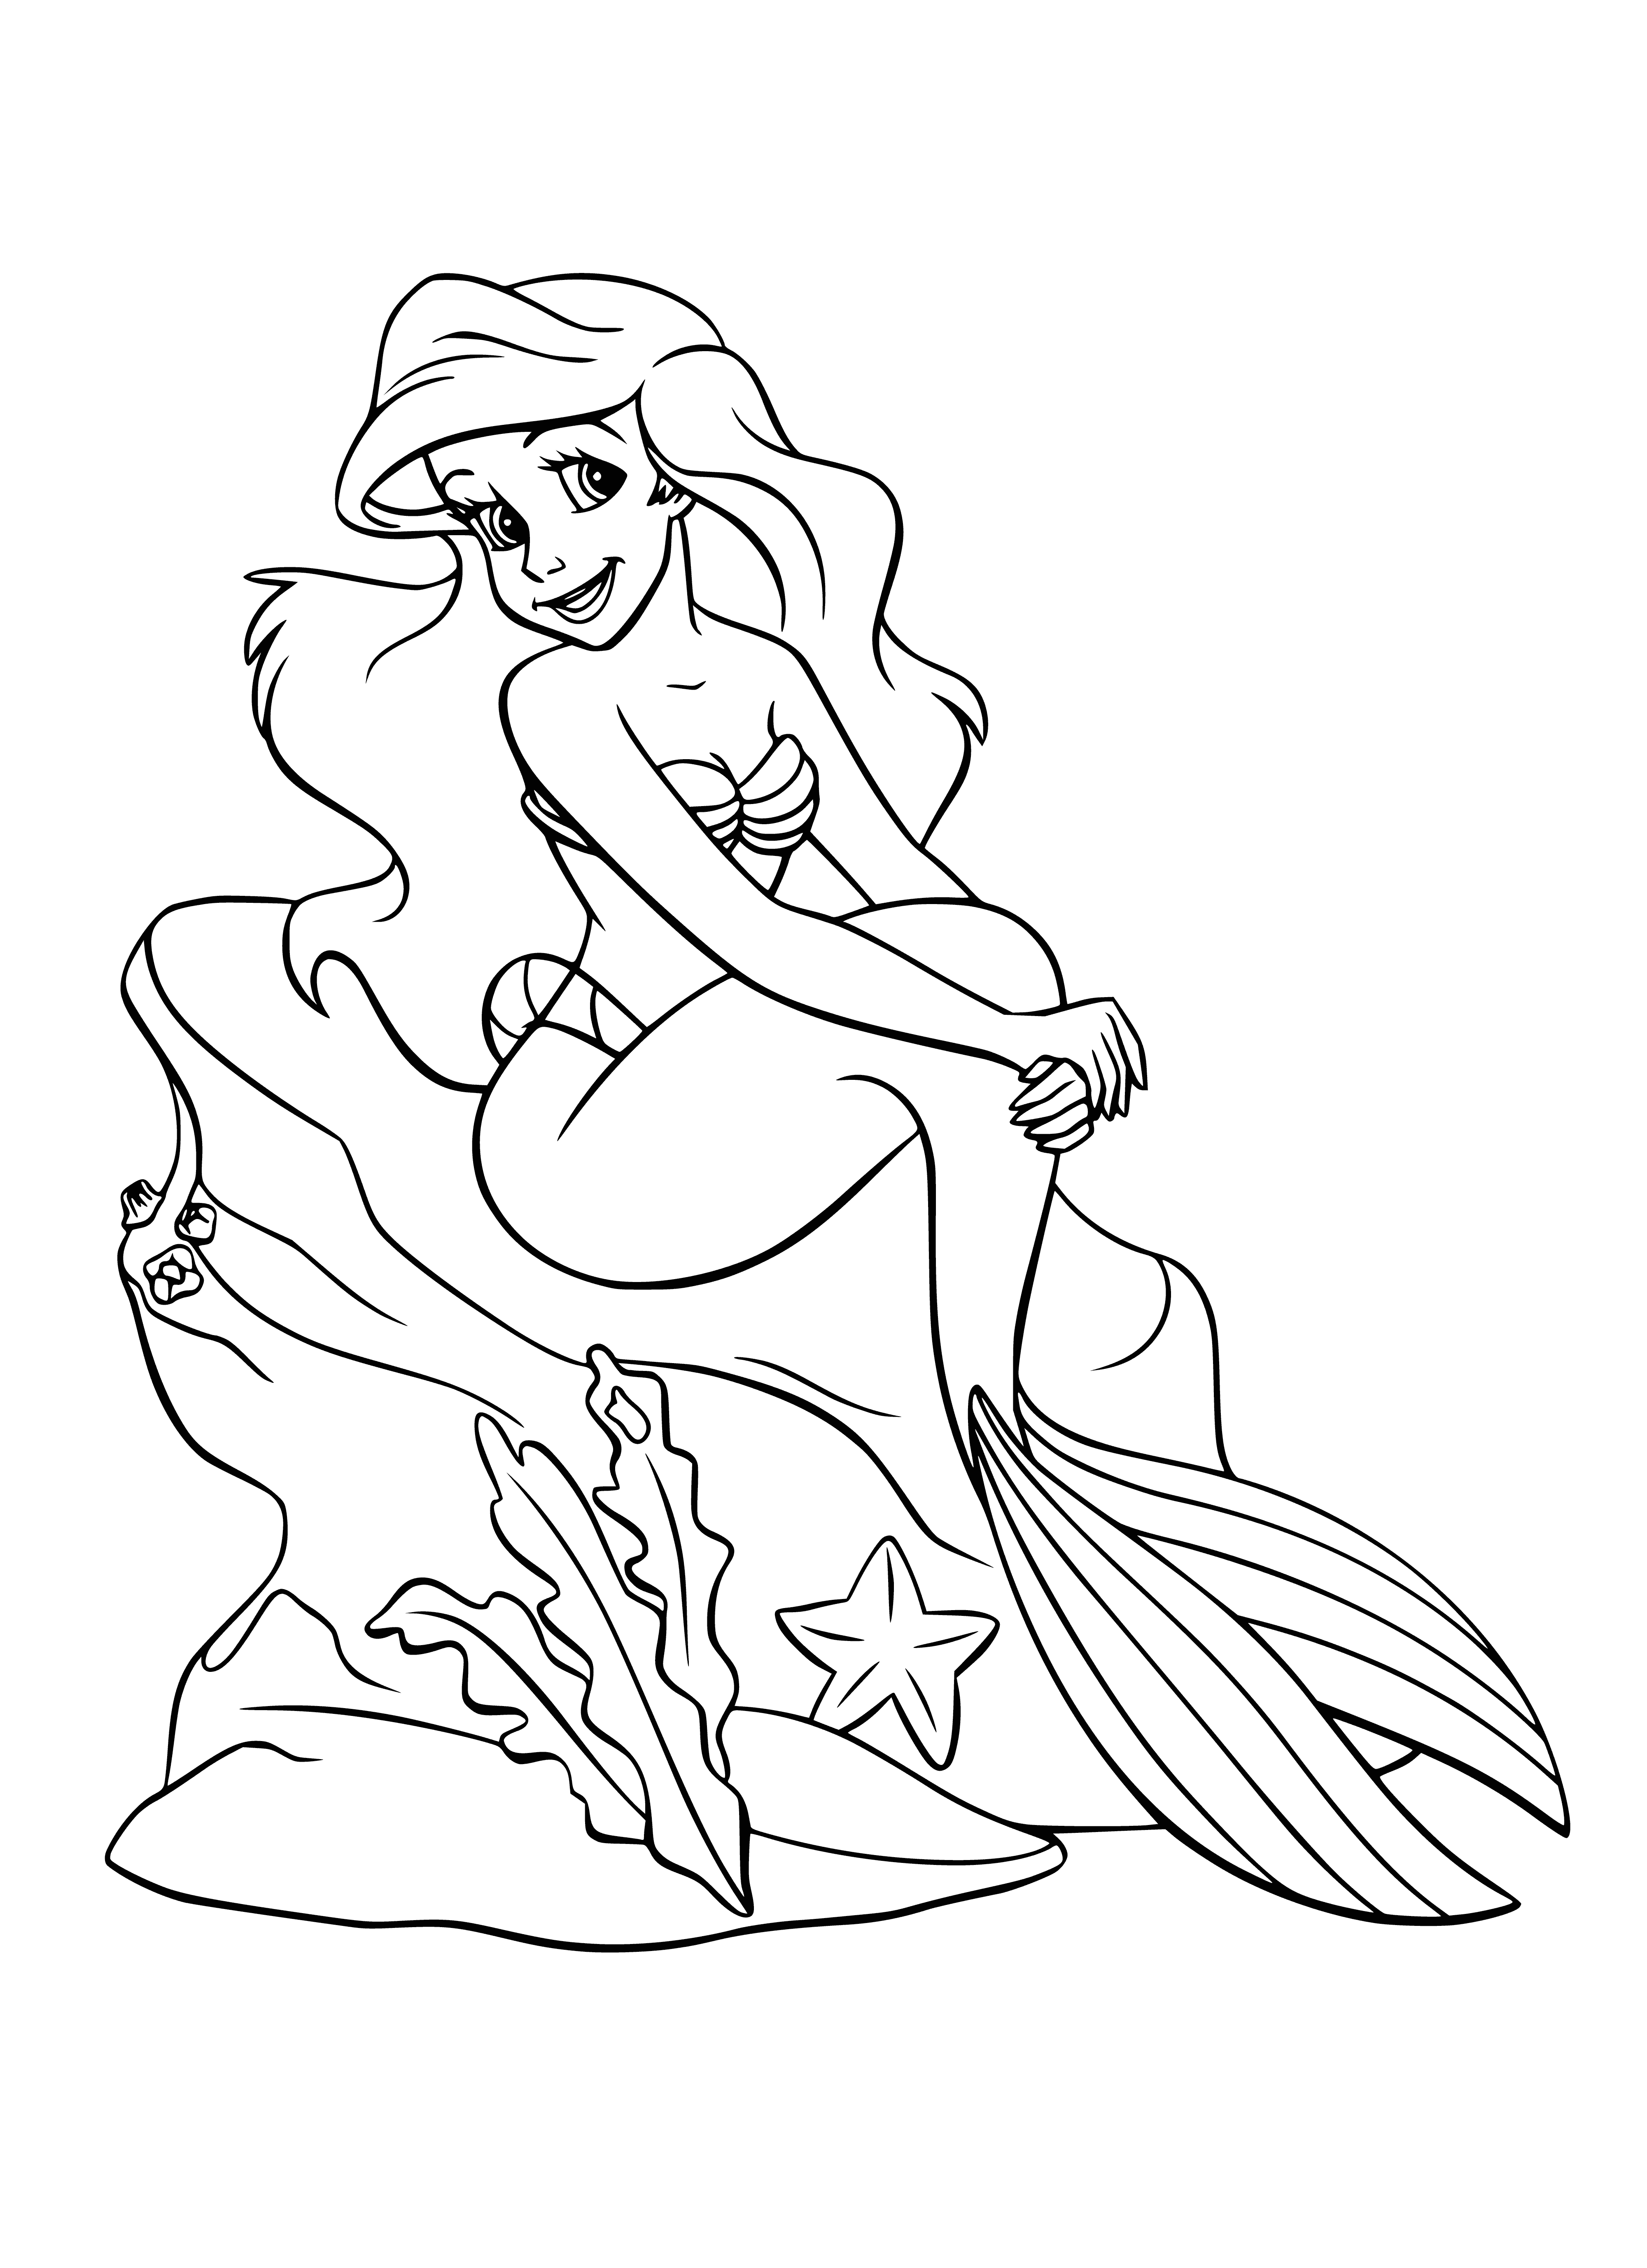 coloring page: Ariel is an adventurous, kind and independent 16-year-old Disney Princess who loves to explore the ocean and is a great friend to her animal companions.